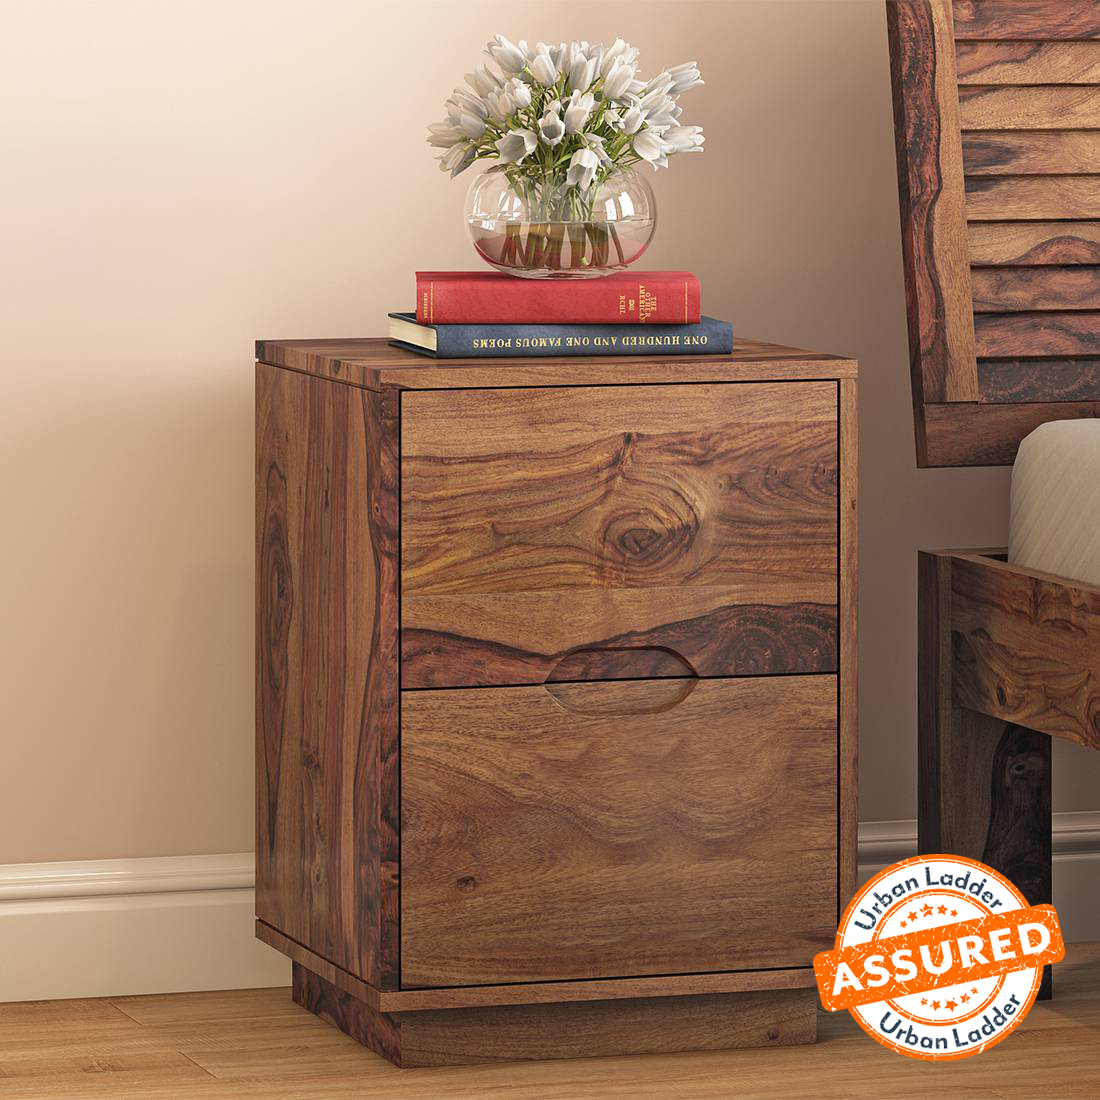 Up to 70% off on Bedside Tables | Full House Sale - Urban Ladder